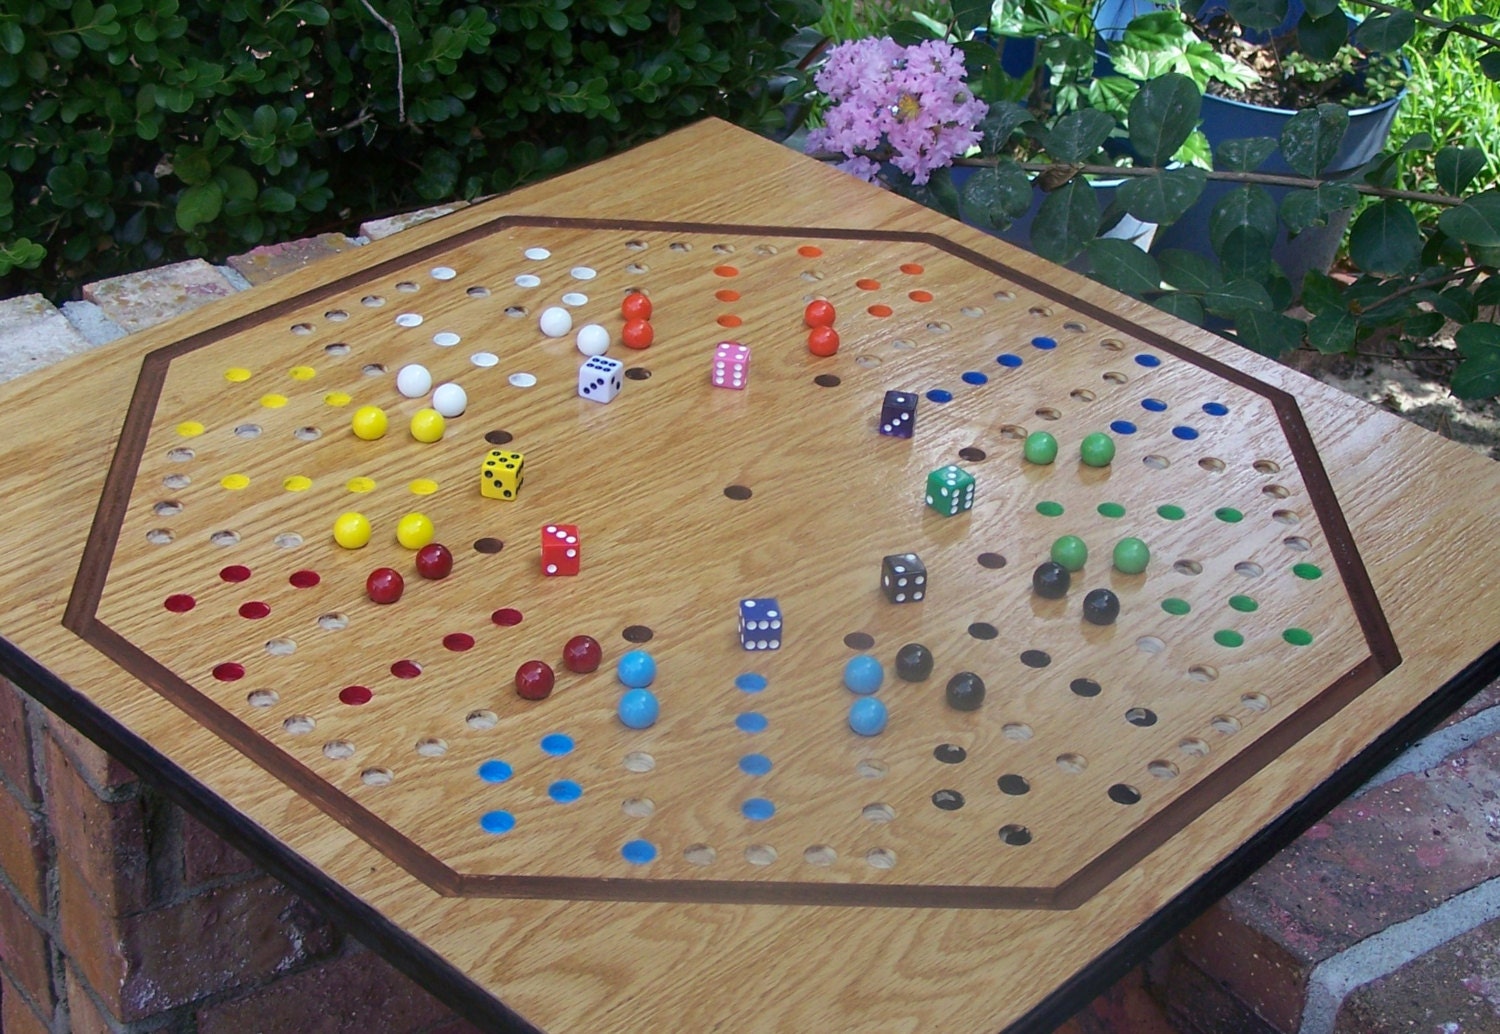 8 player Aggravation board game by WoodDesigner on Etsy